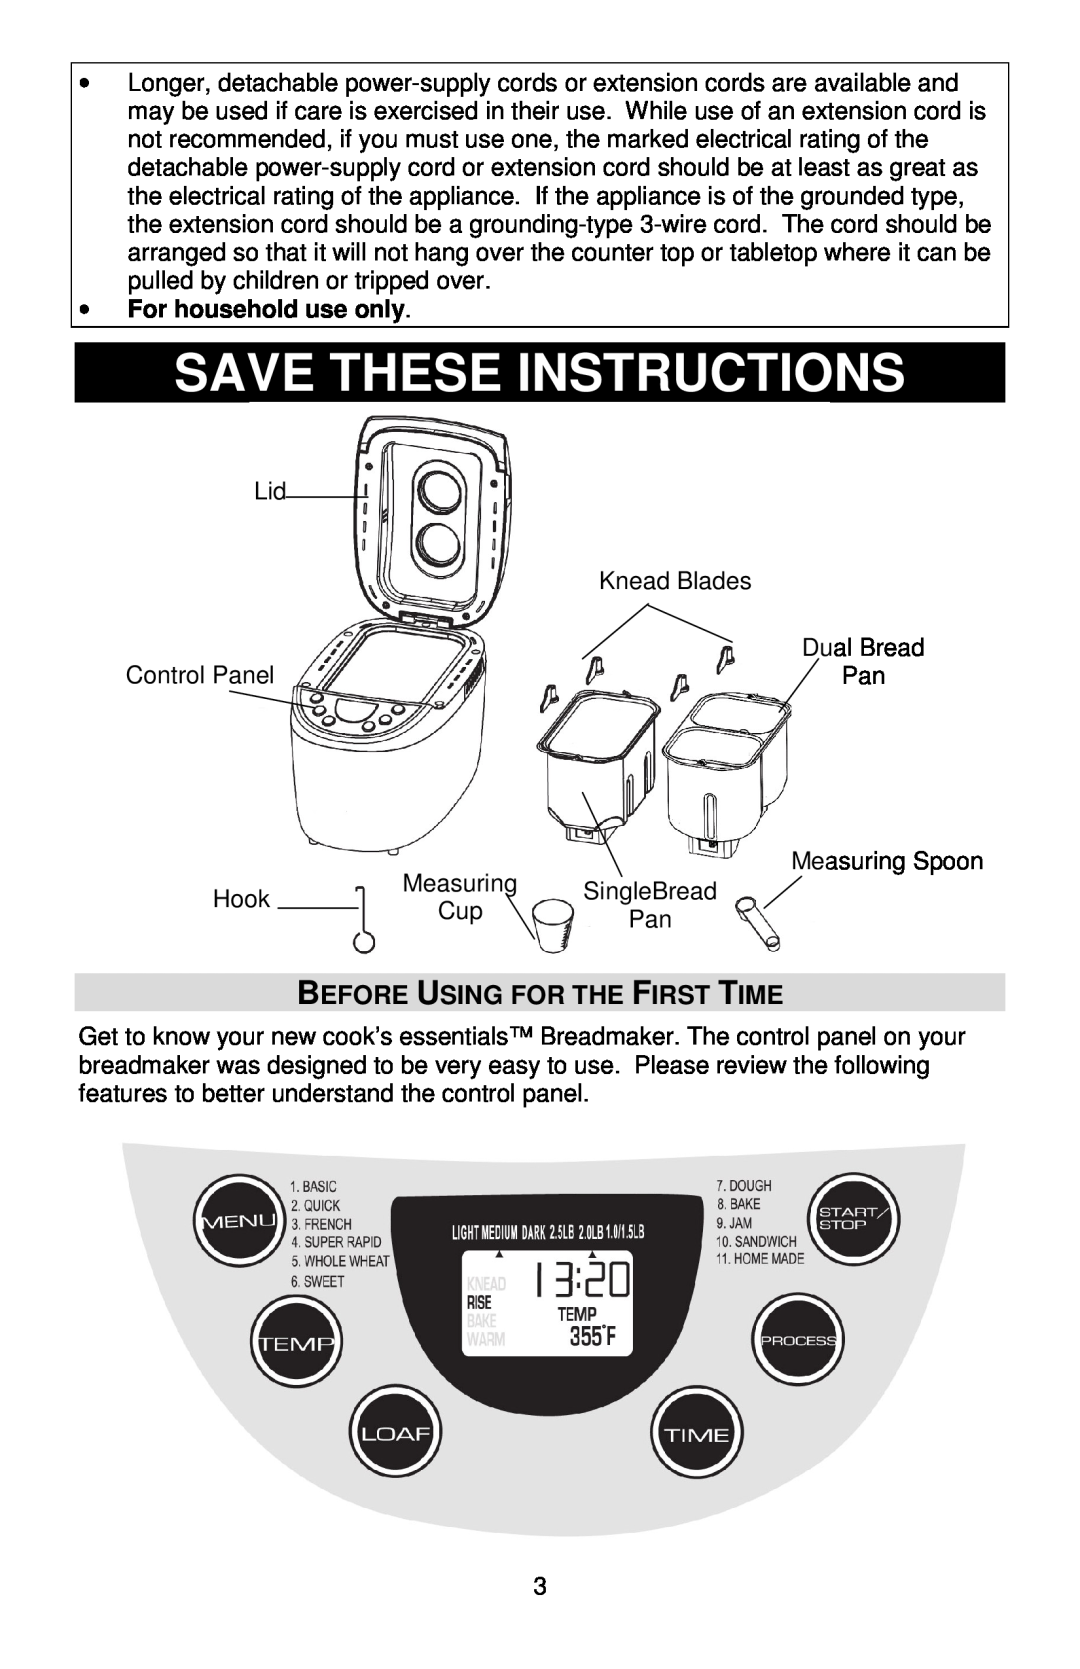 West Bend 41300B, L5815 instruction manual Save These Instructions, Before Using For The First Time, For household use only 